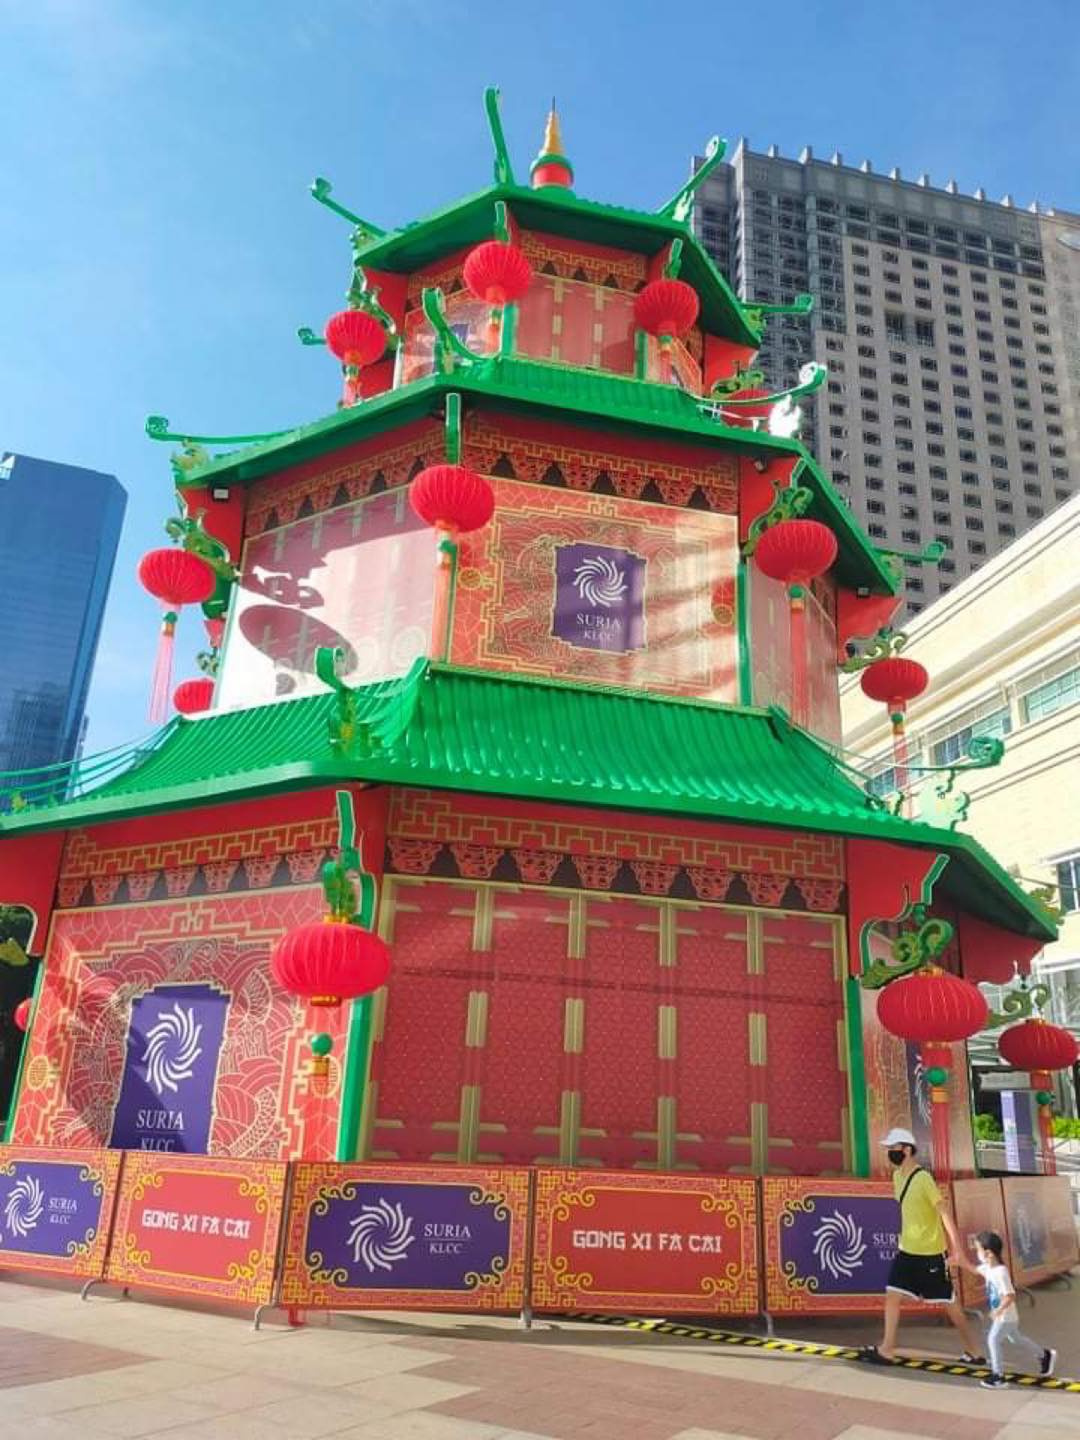 The CNY pagoda used by KLCC before its new coat of paint.